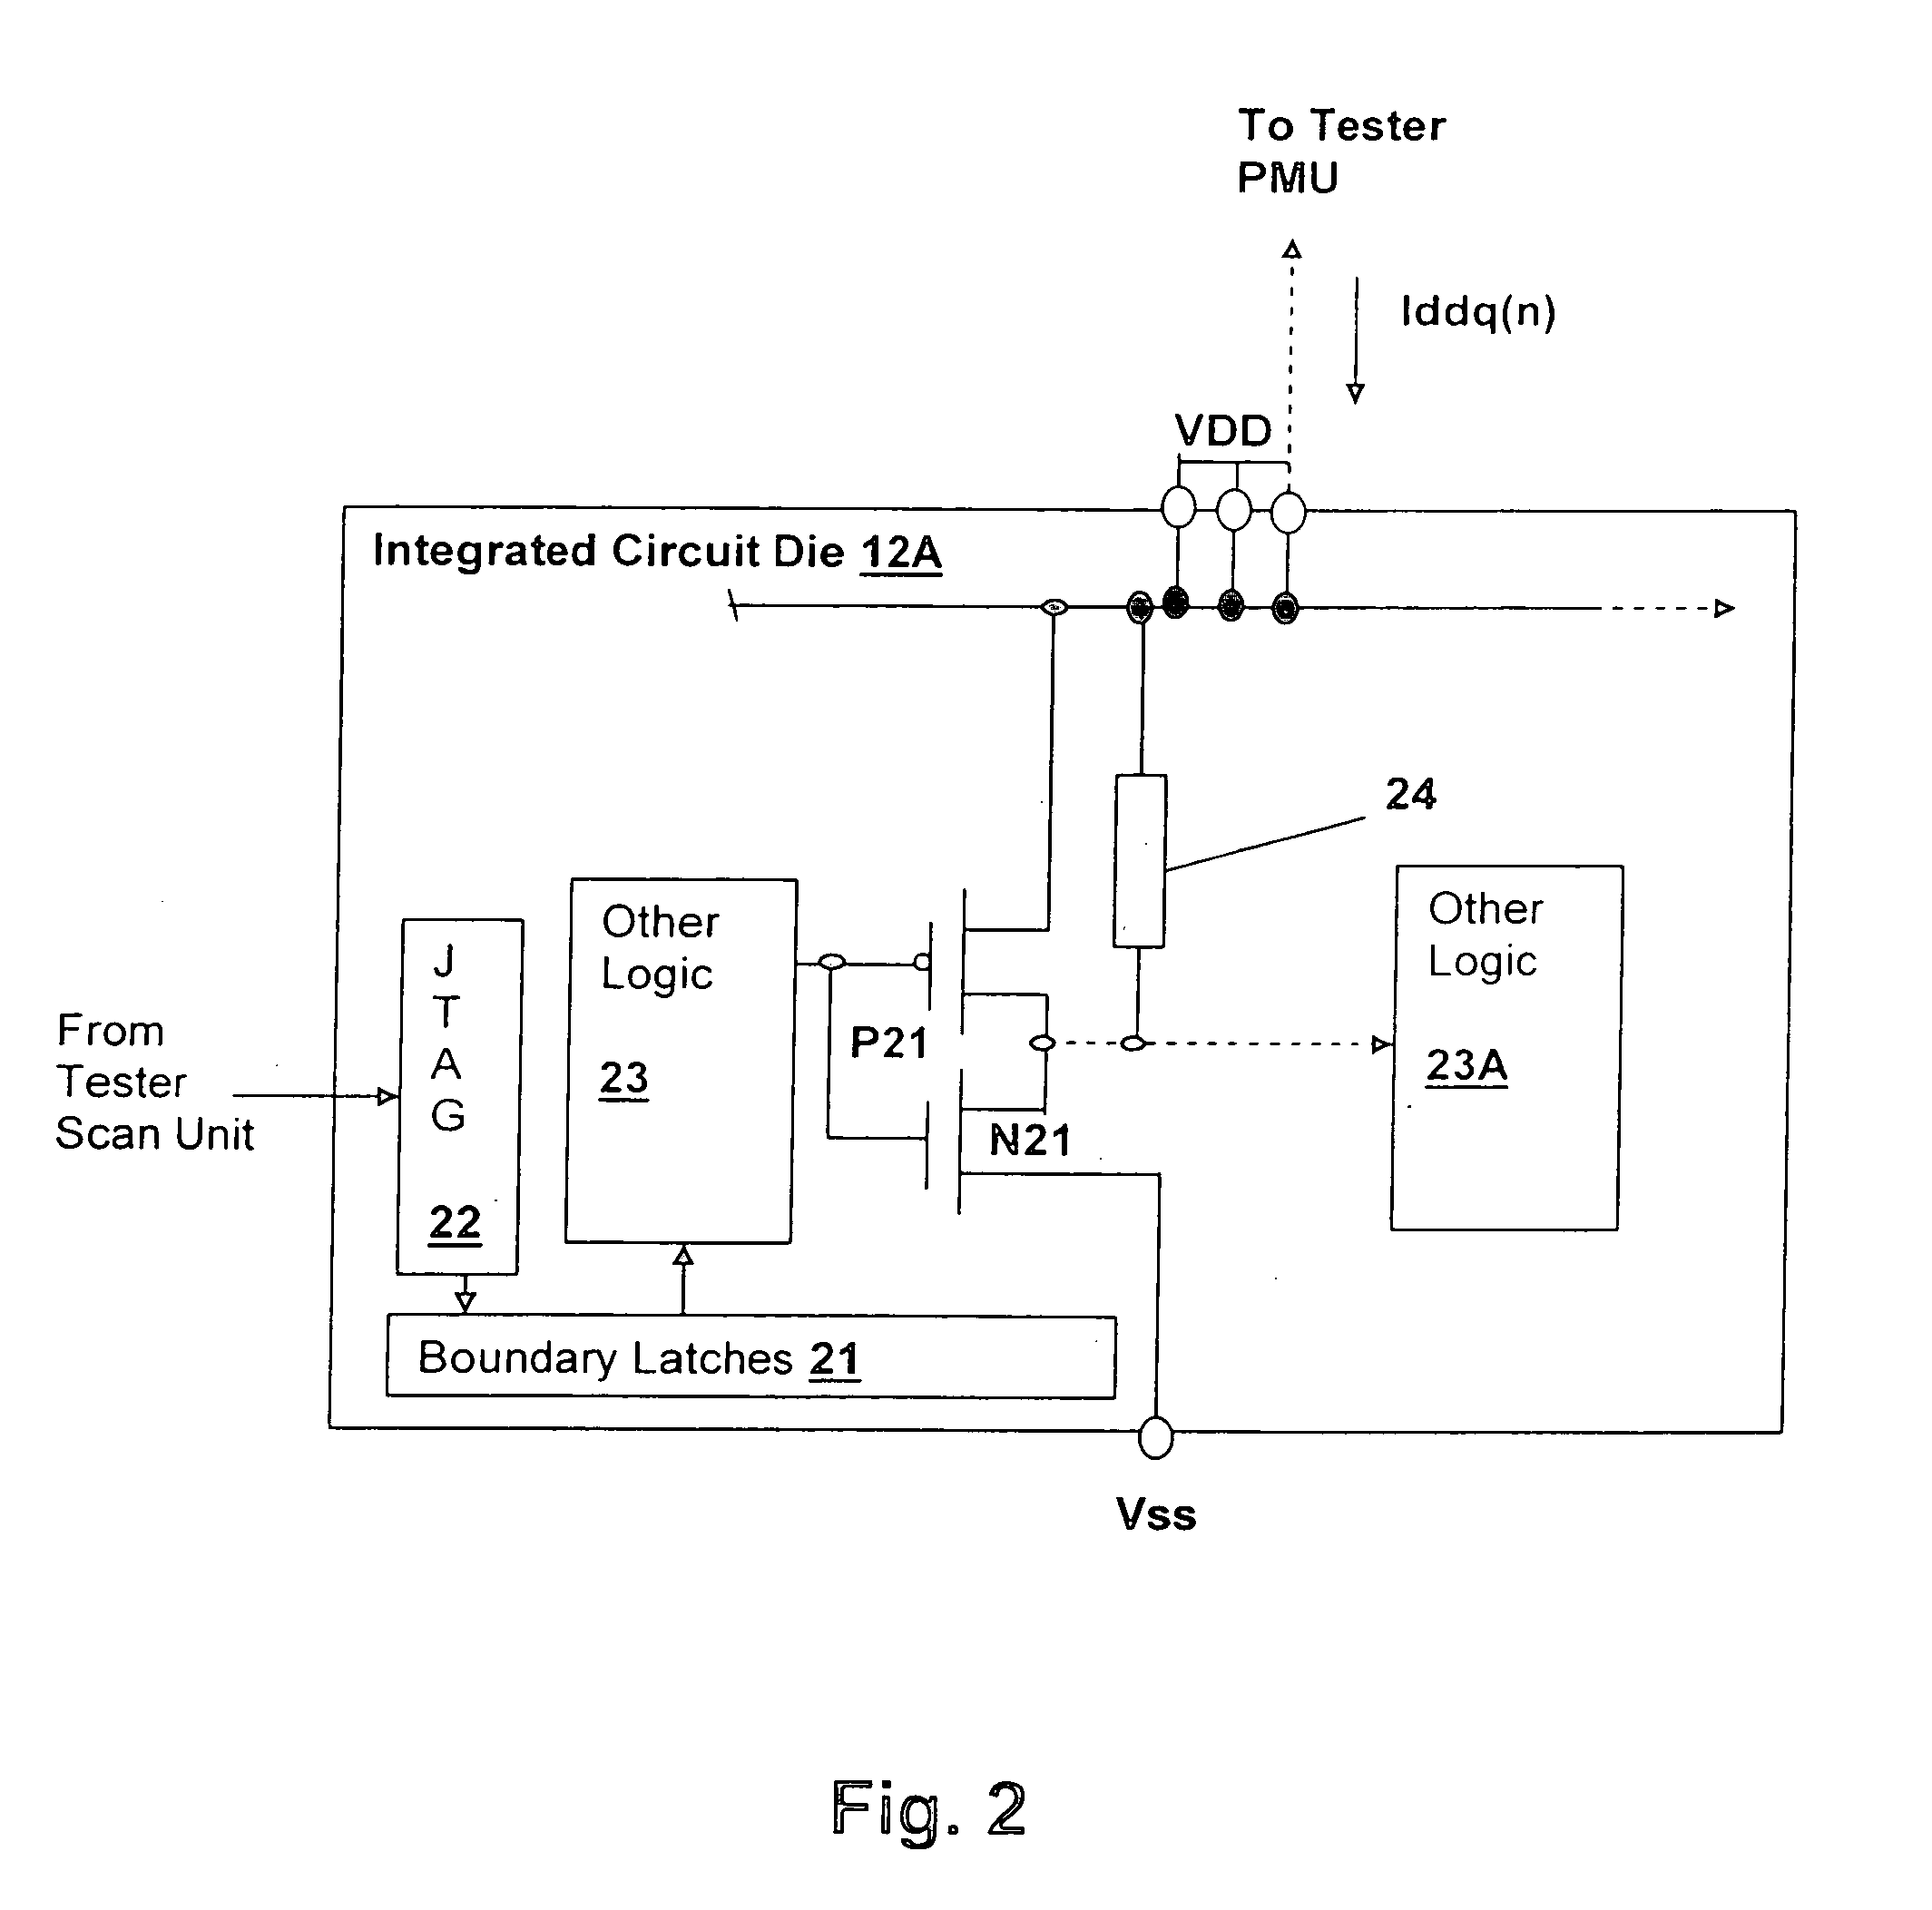 Method and system for defect evaluation using quiescent power plane current (IDDQ) voltage linearity